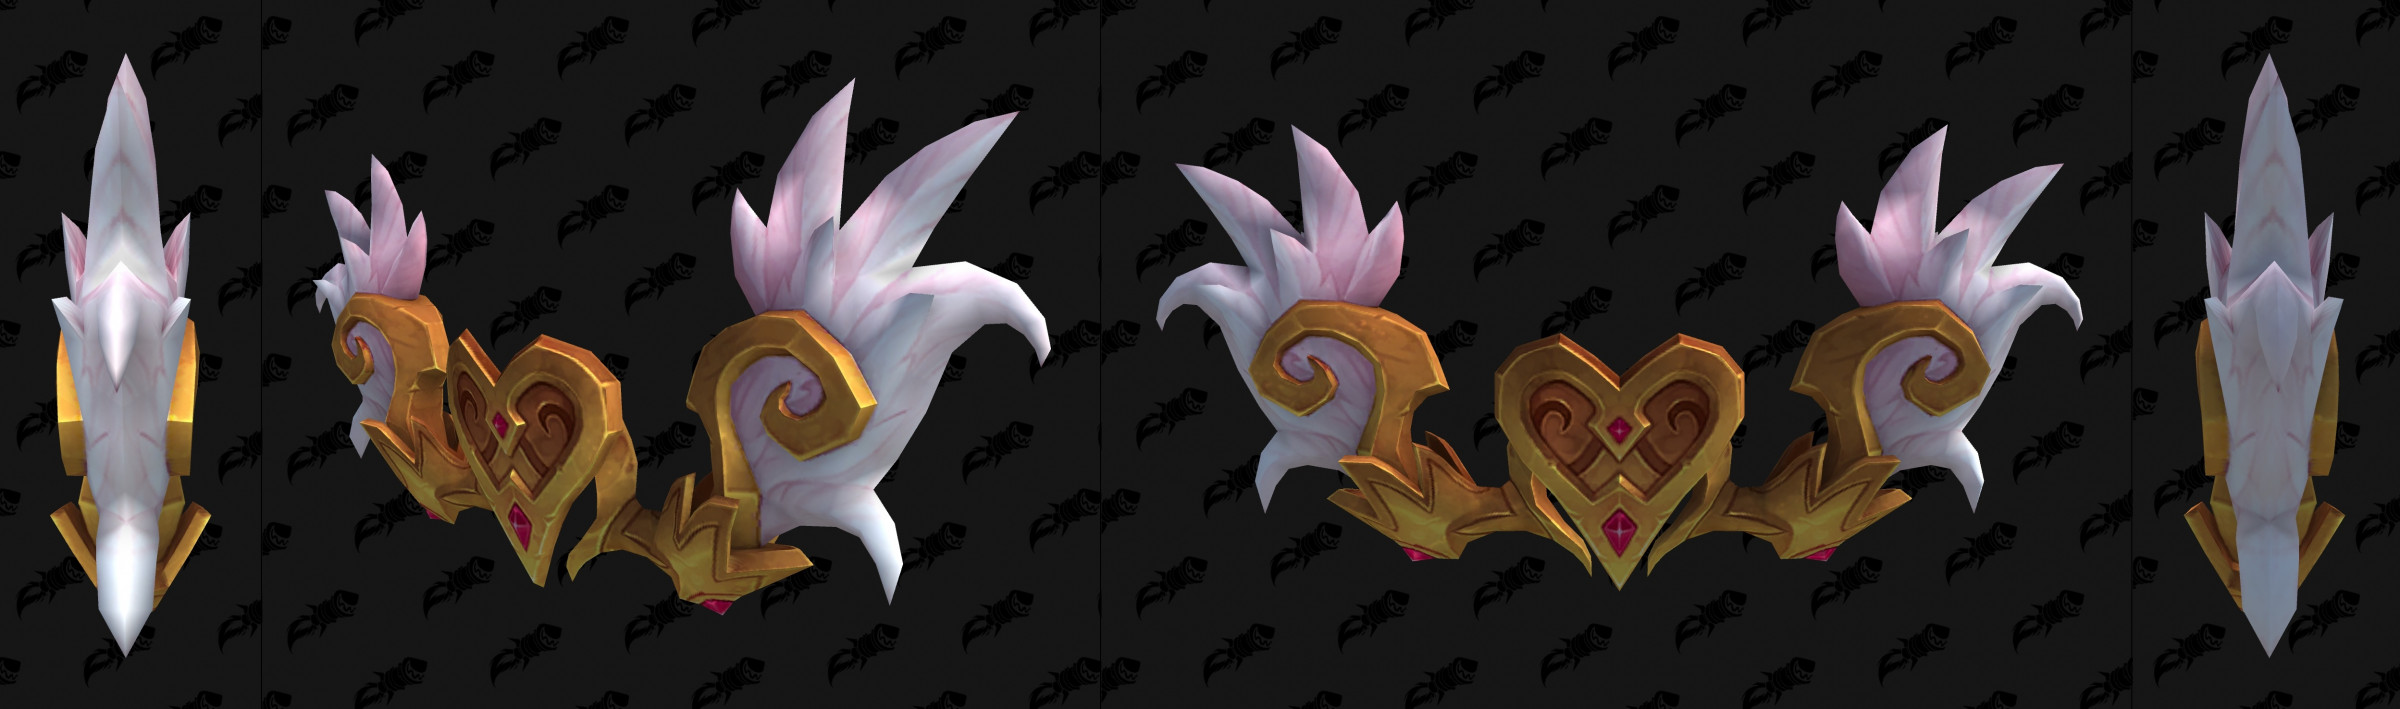 World of Warcraft: Dragonflight's Seeds of Renewal 10.2.5 Patch unveils  major changes. Details here - The Economic Times